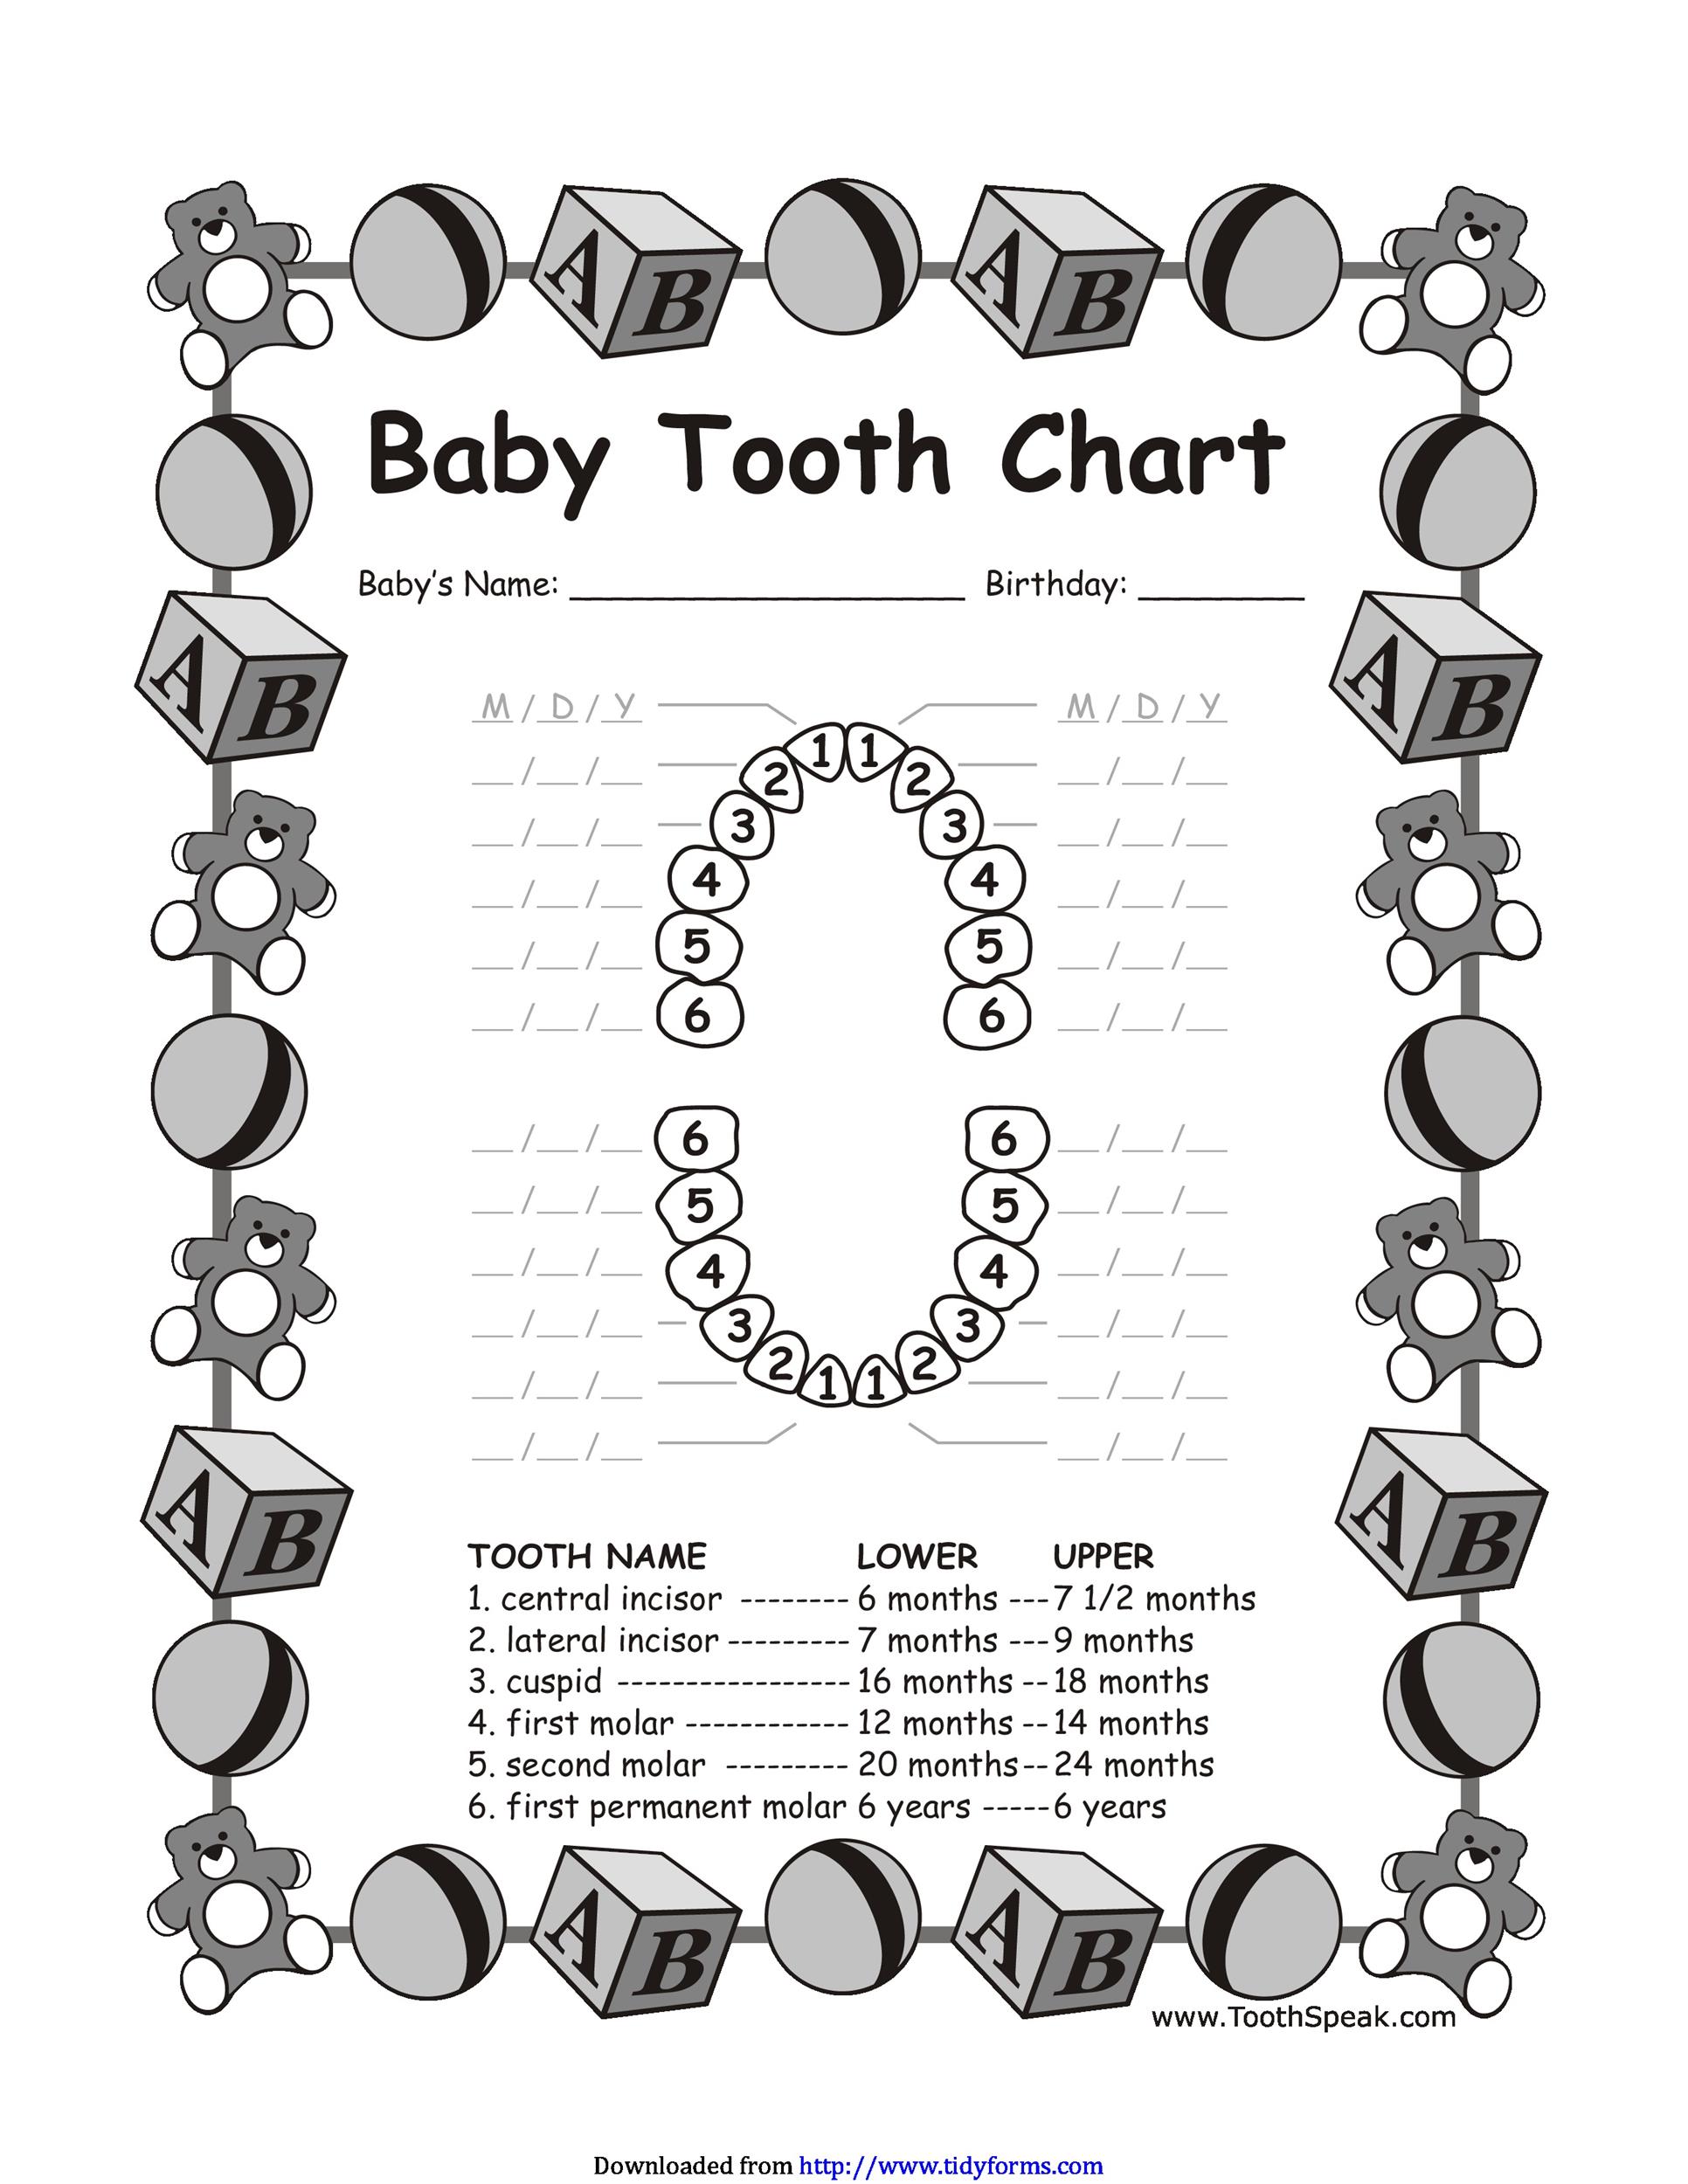 View Baby Teeth Eruption Charts Pictures Teeth Walls Collection For 